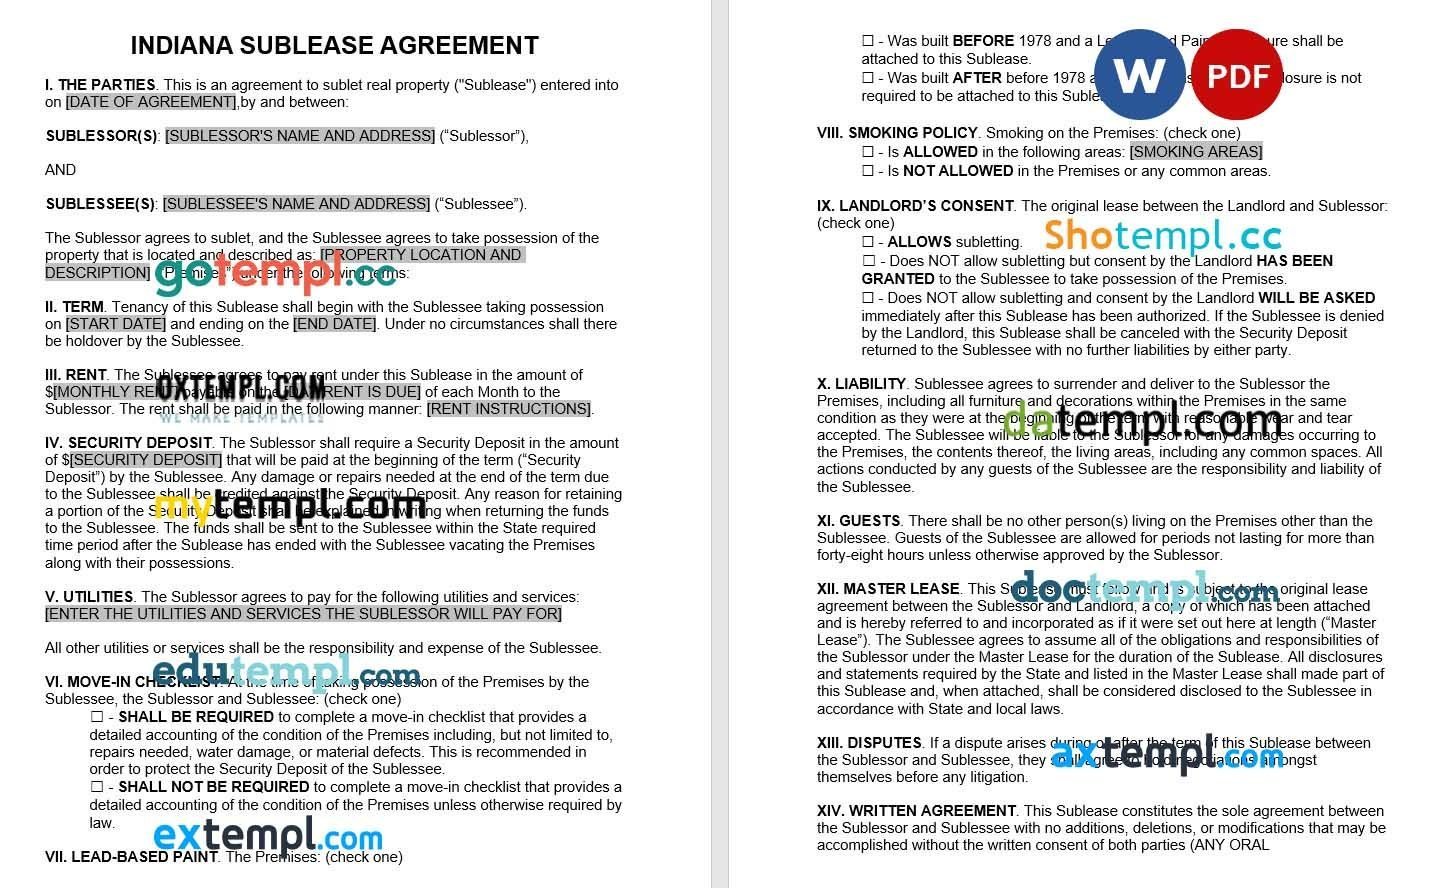 Indianna Sublease Agreement Word example, fully editable